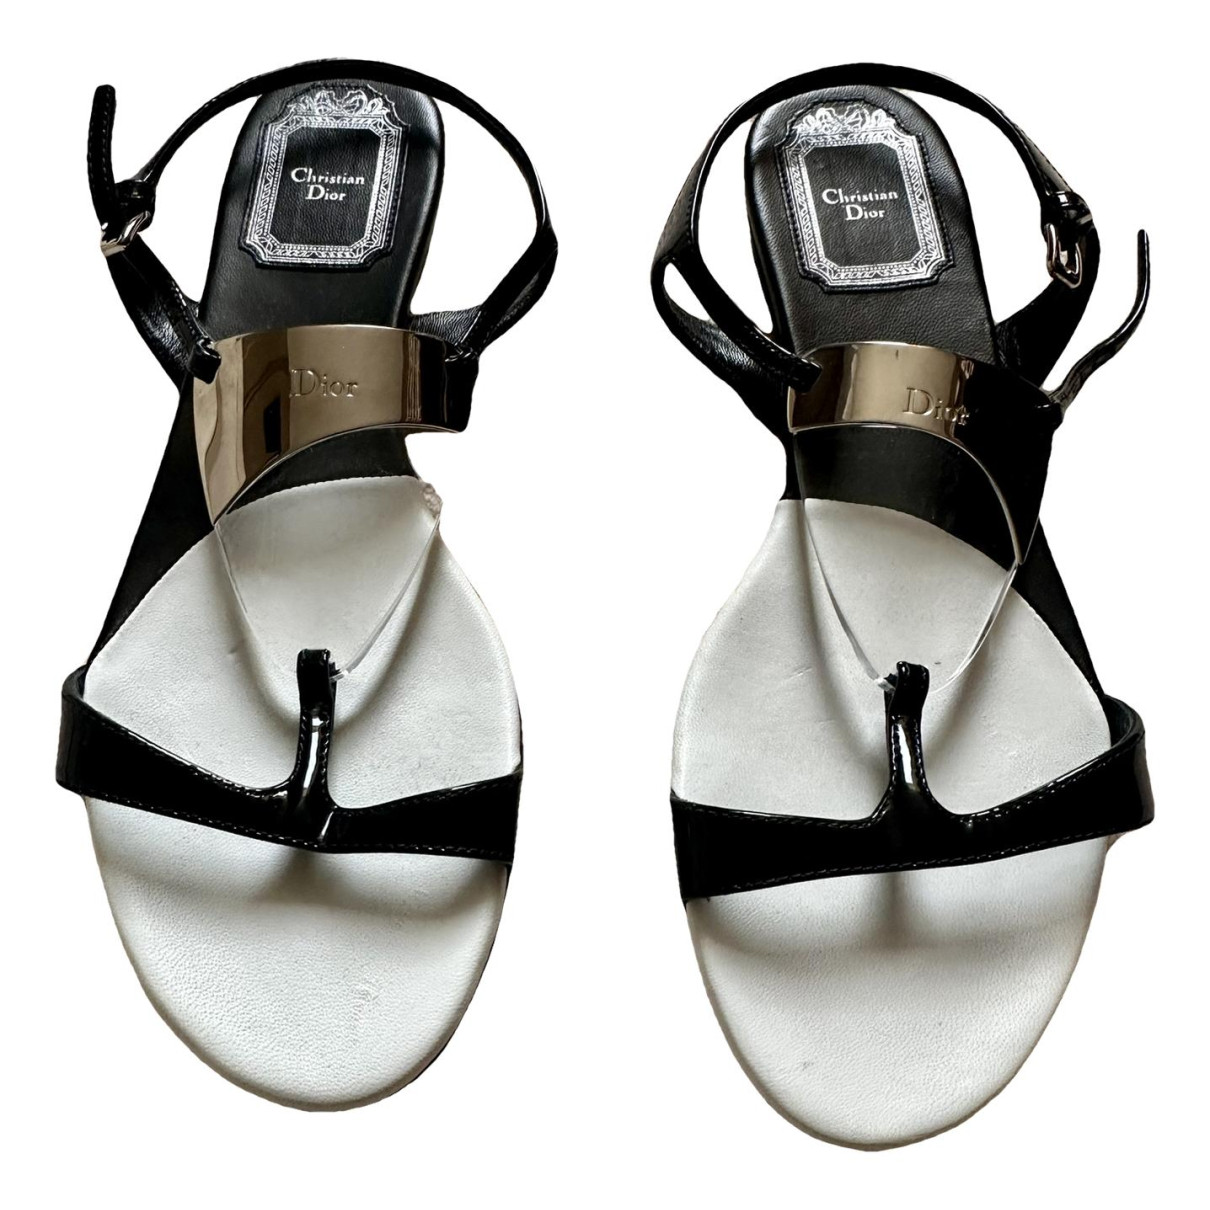 shoes Dior sandals for Female Patent leather 36.5 EU. Used condition